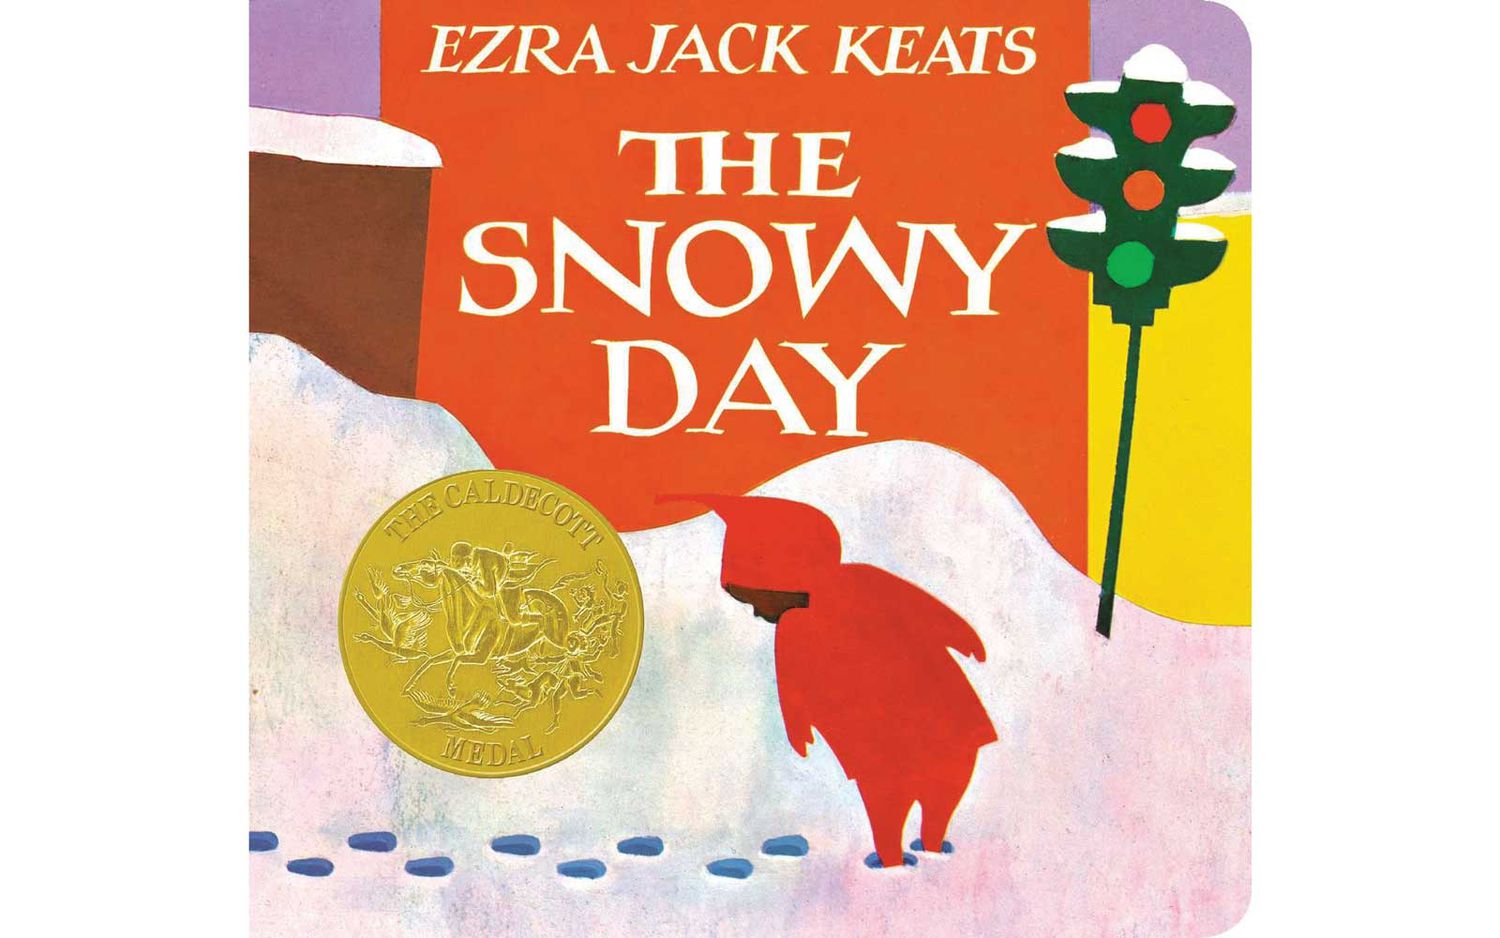 The Snowy Day by Ezra Jack Keats Book Cover